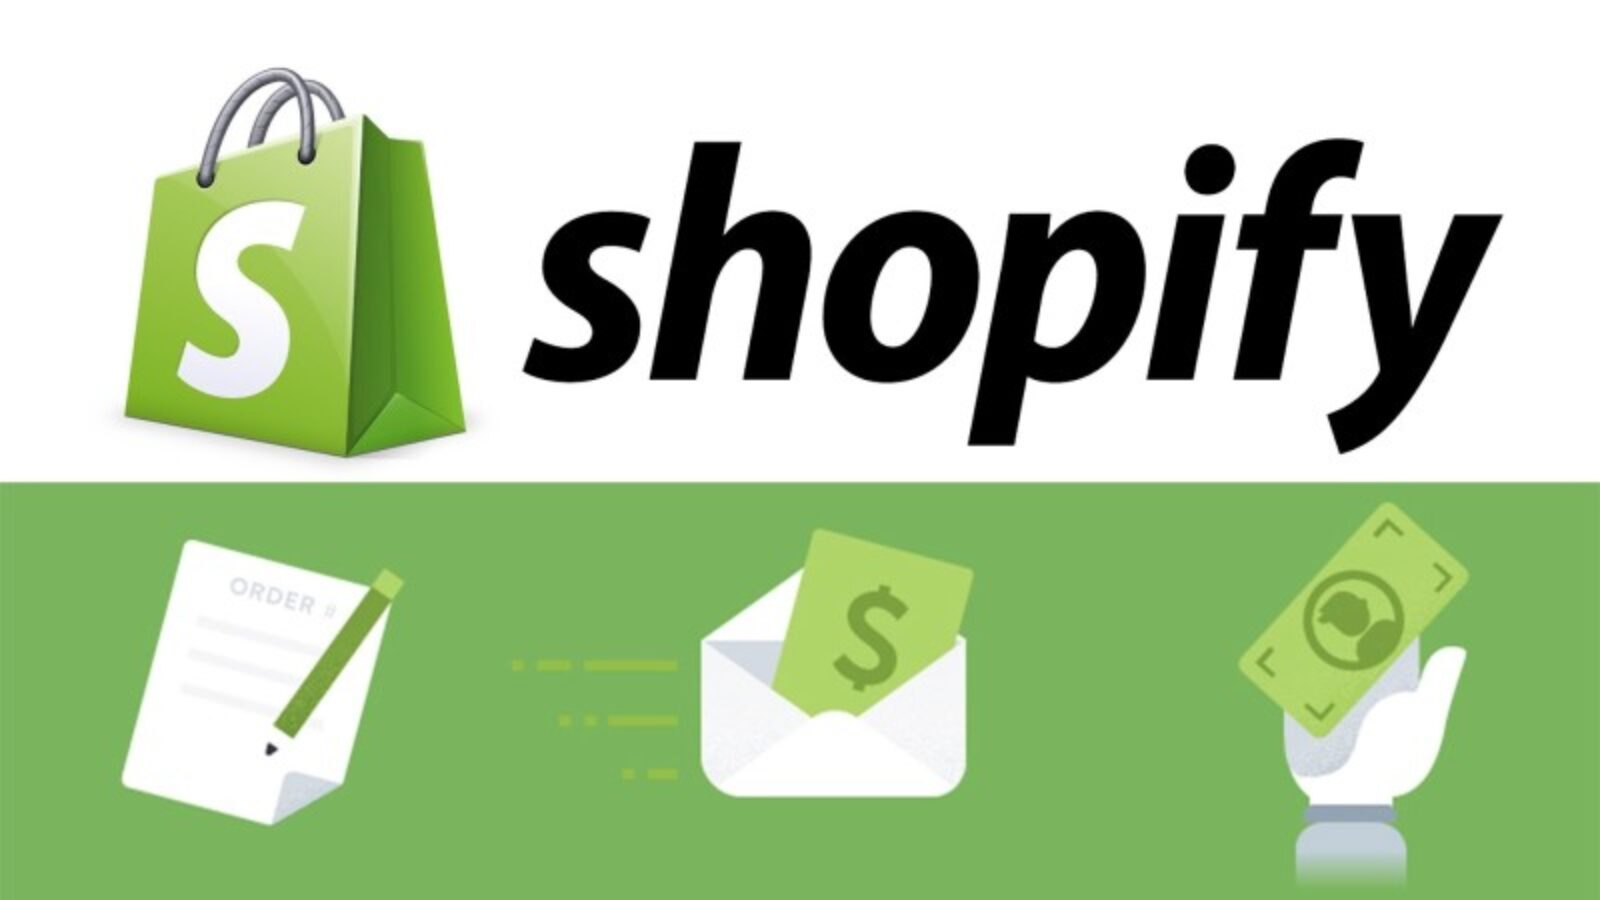 Hire a Shopify development agency to reap the benefits